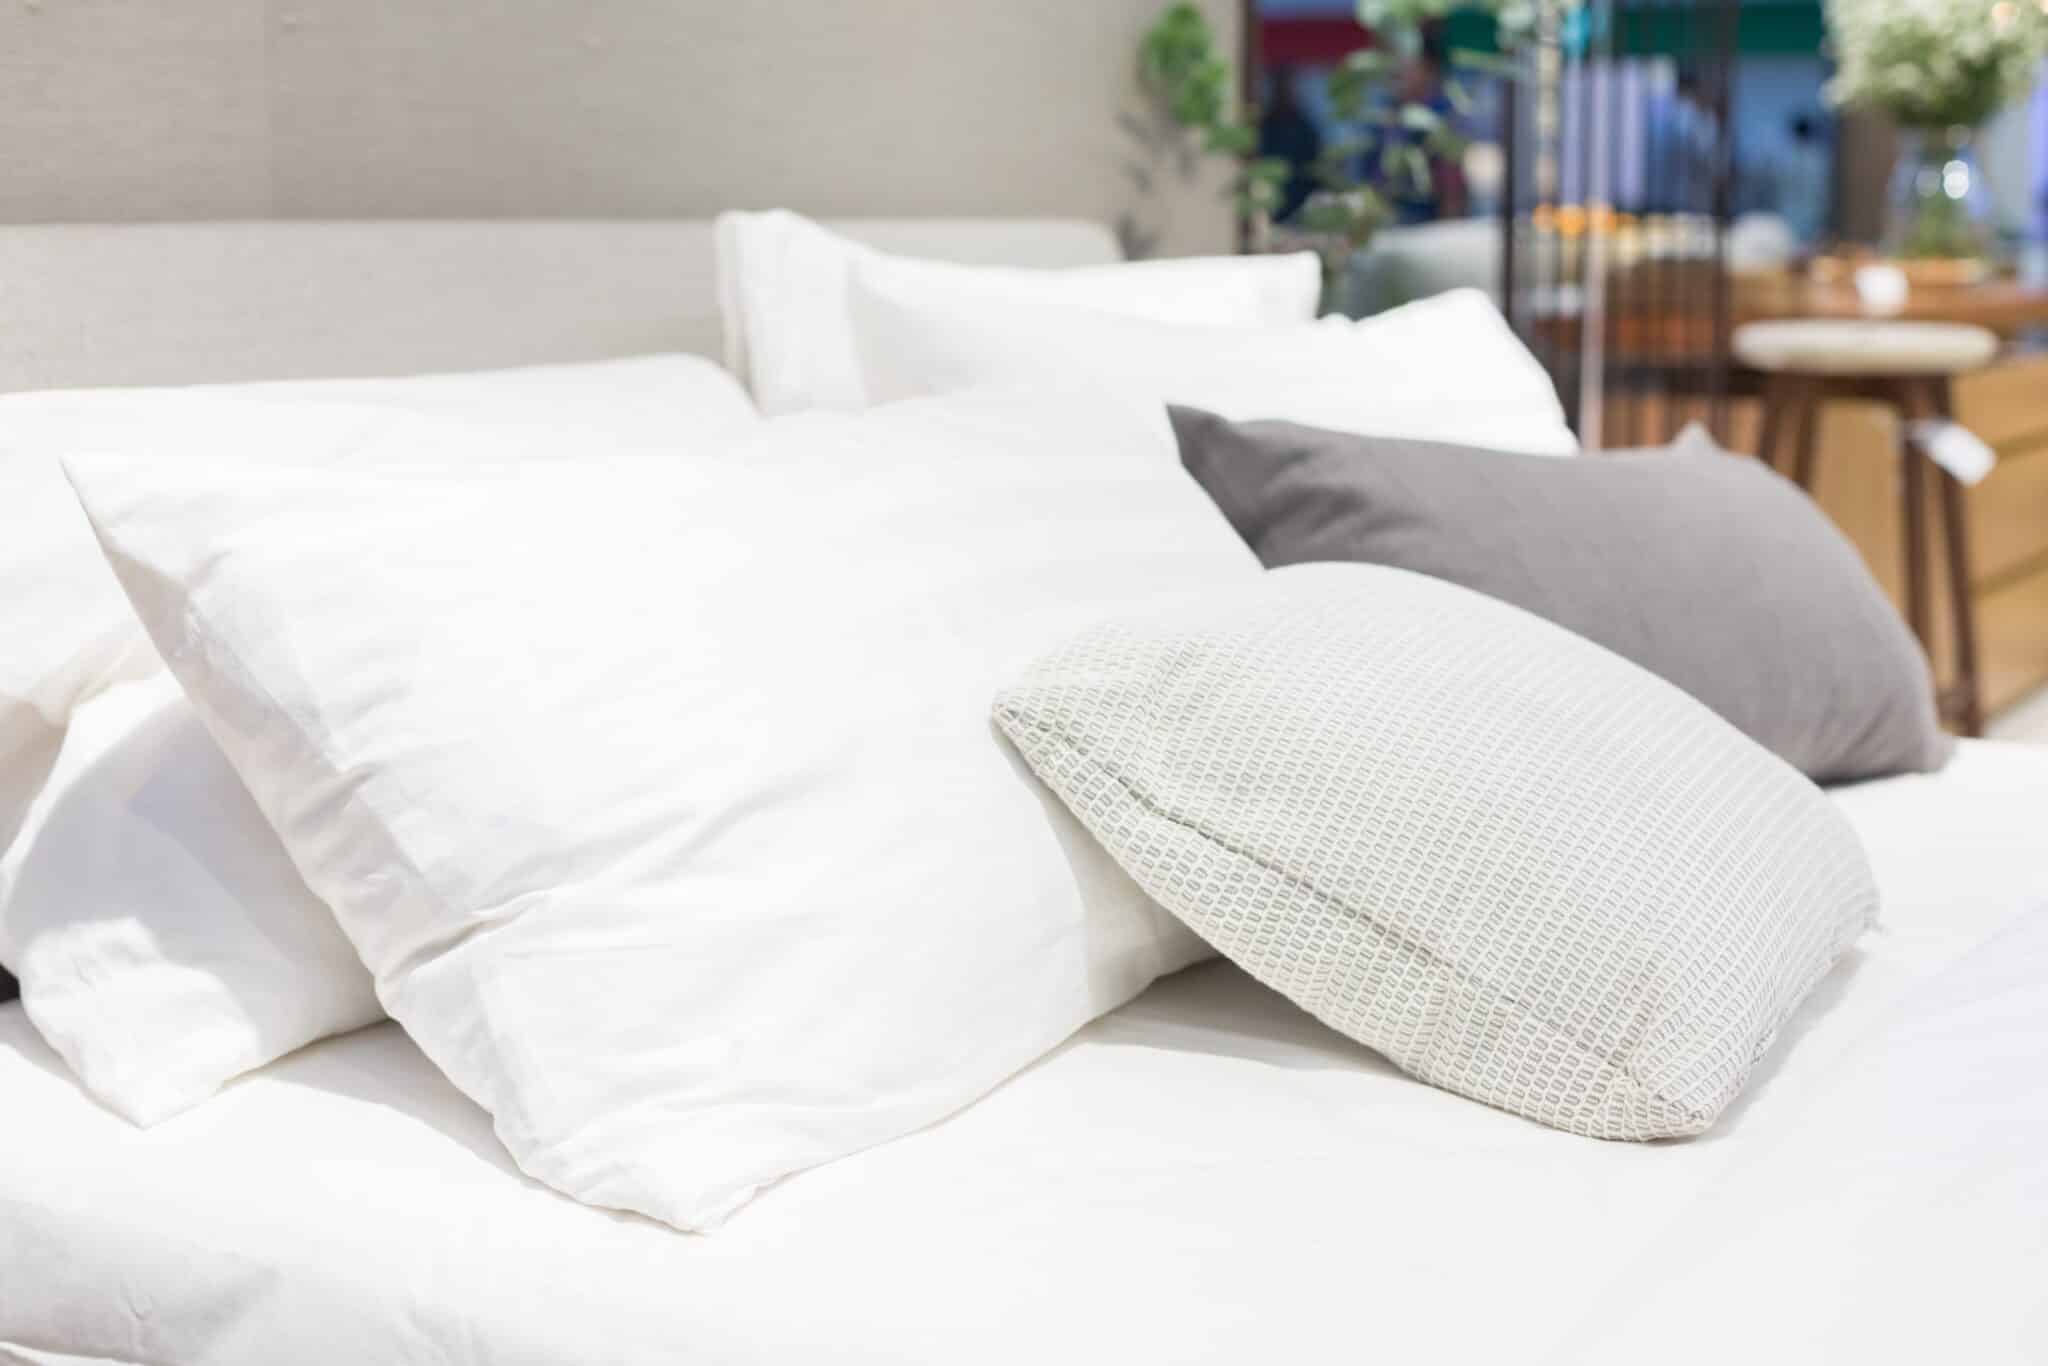 Bed with white sheets and pillows